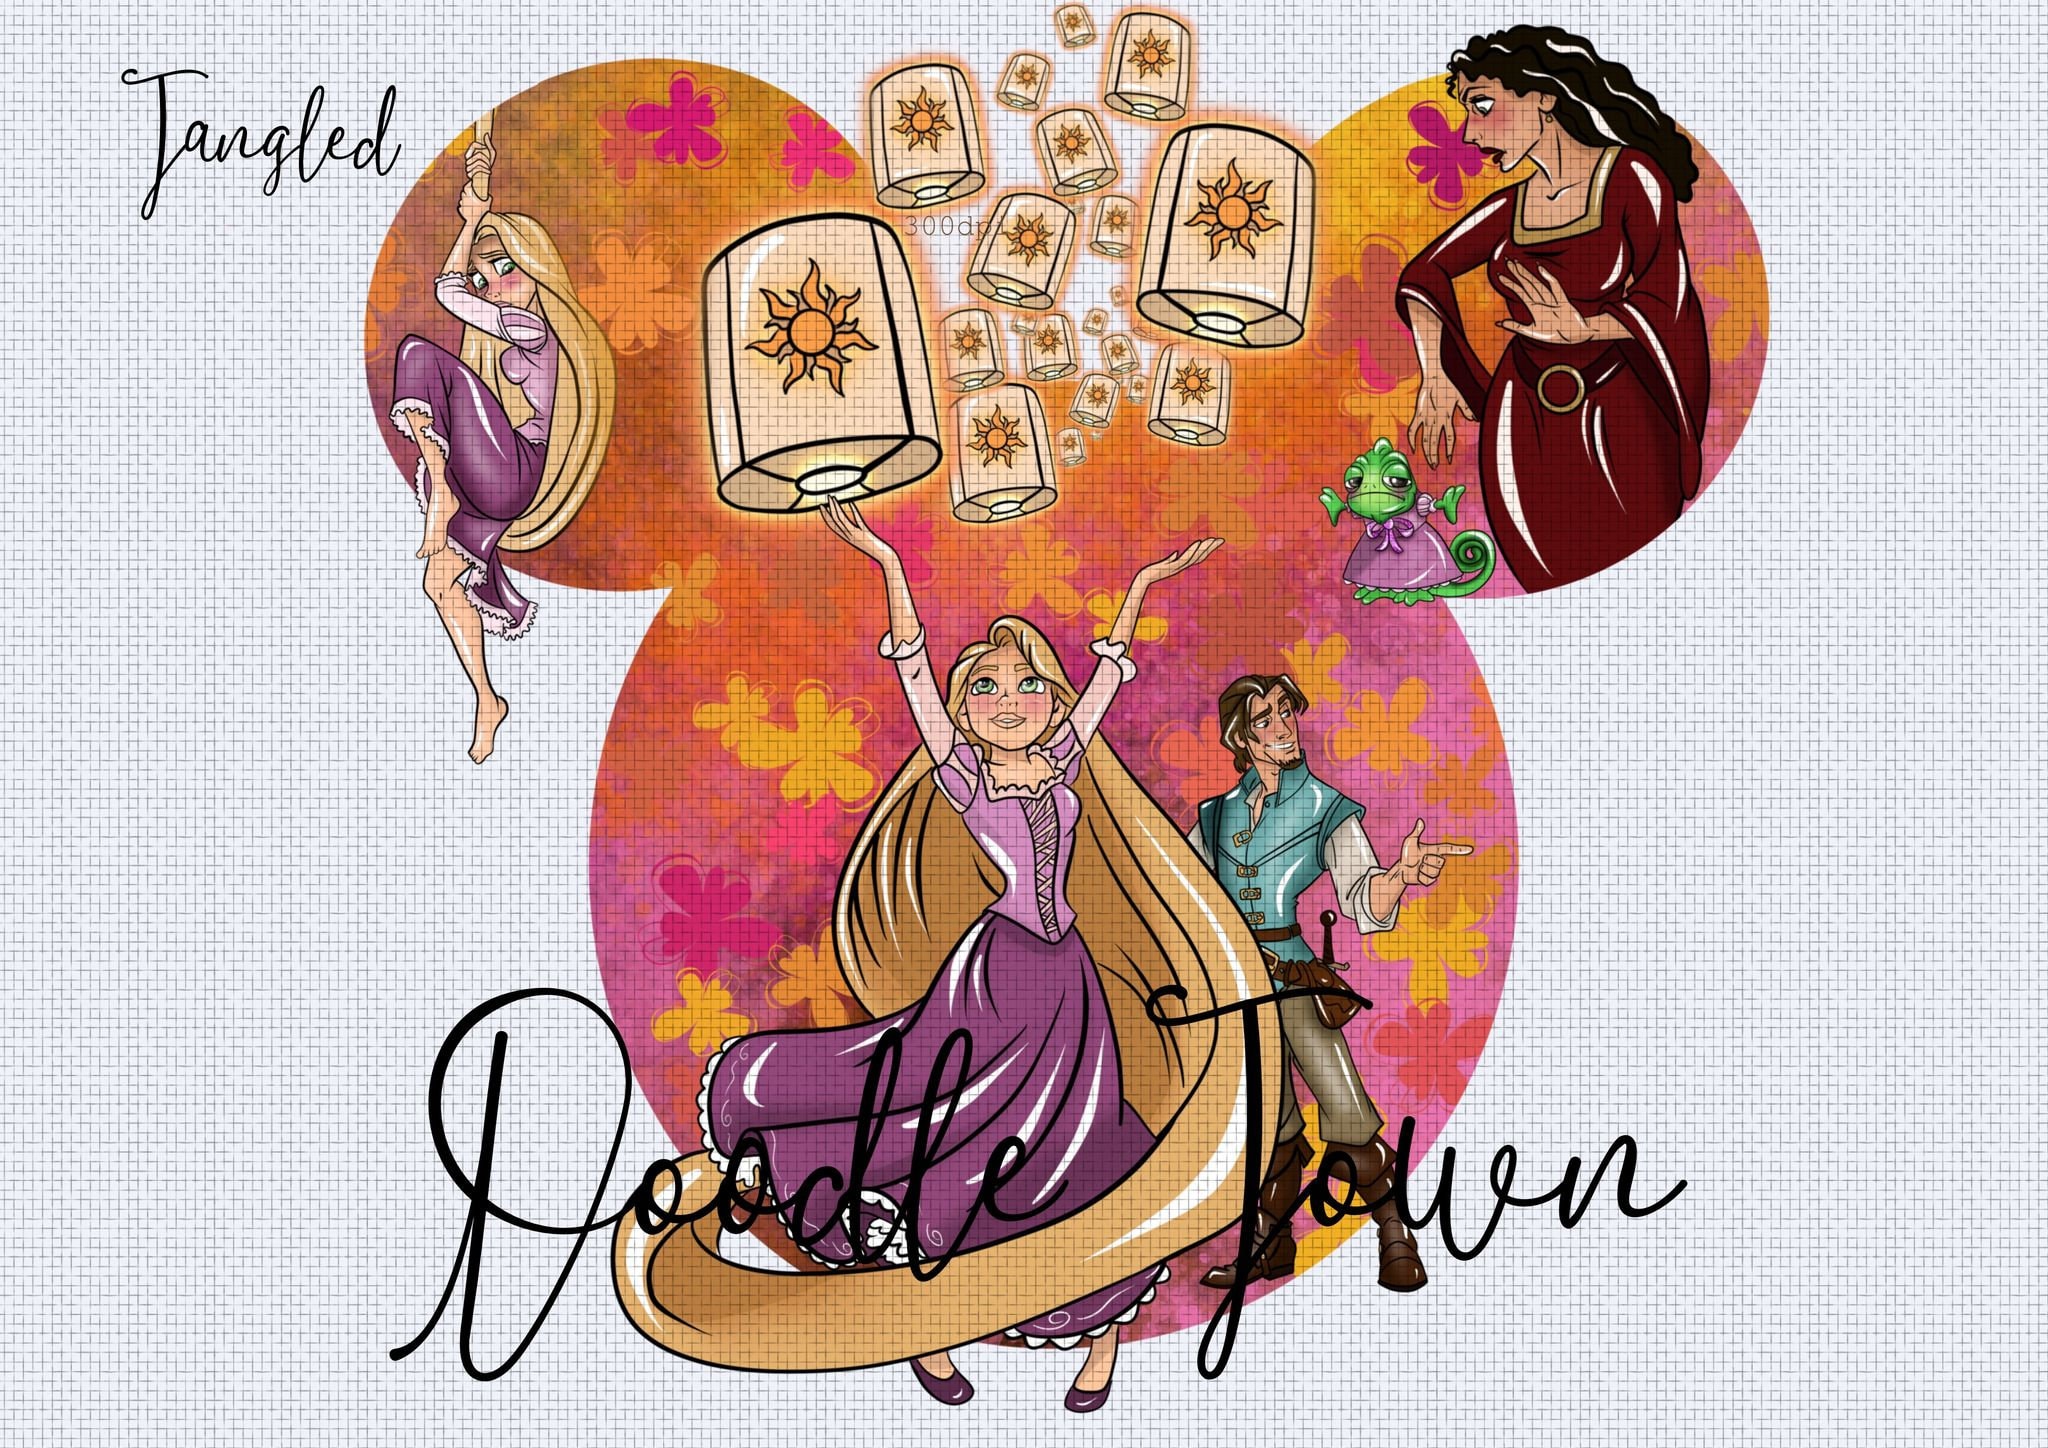 5D Diamond Painting Disney Rapunzel Silhouette with a floating lantern